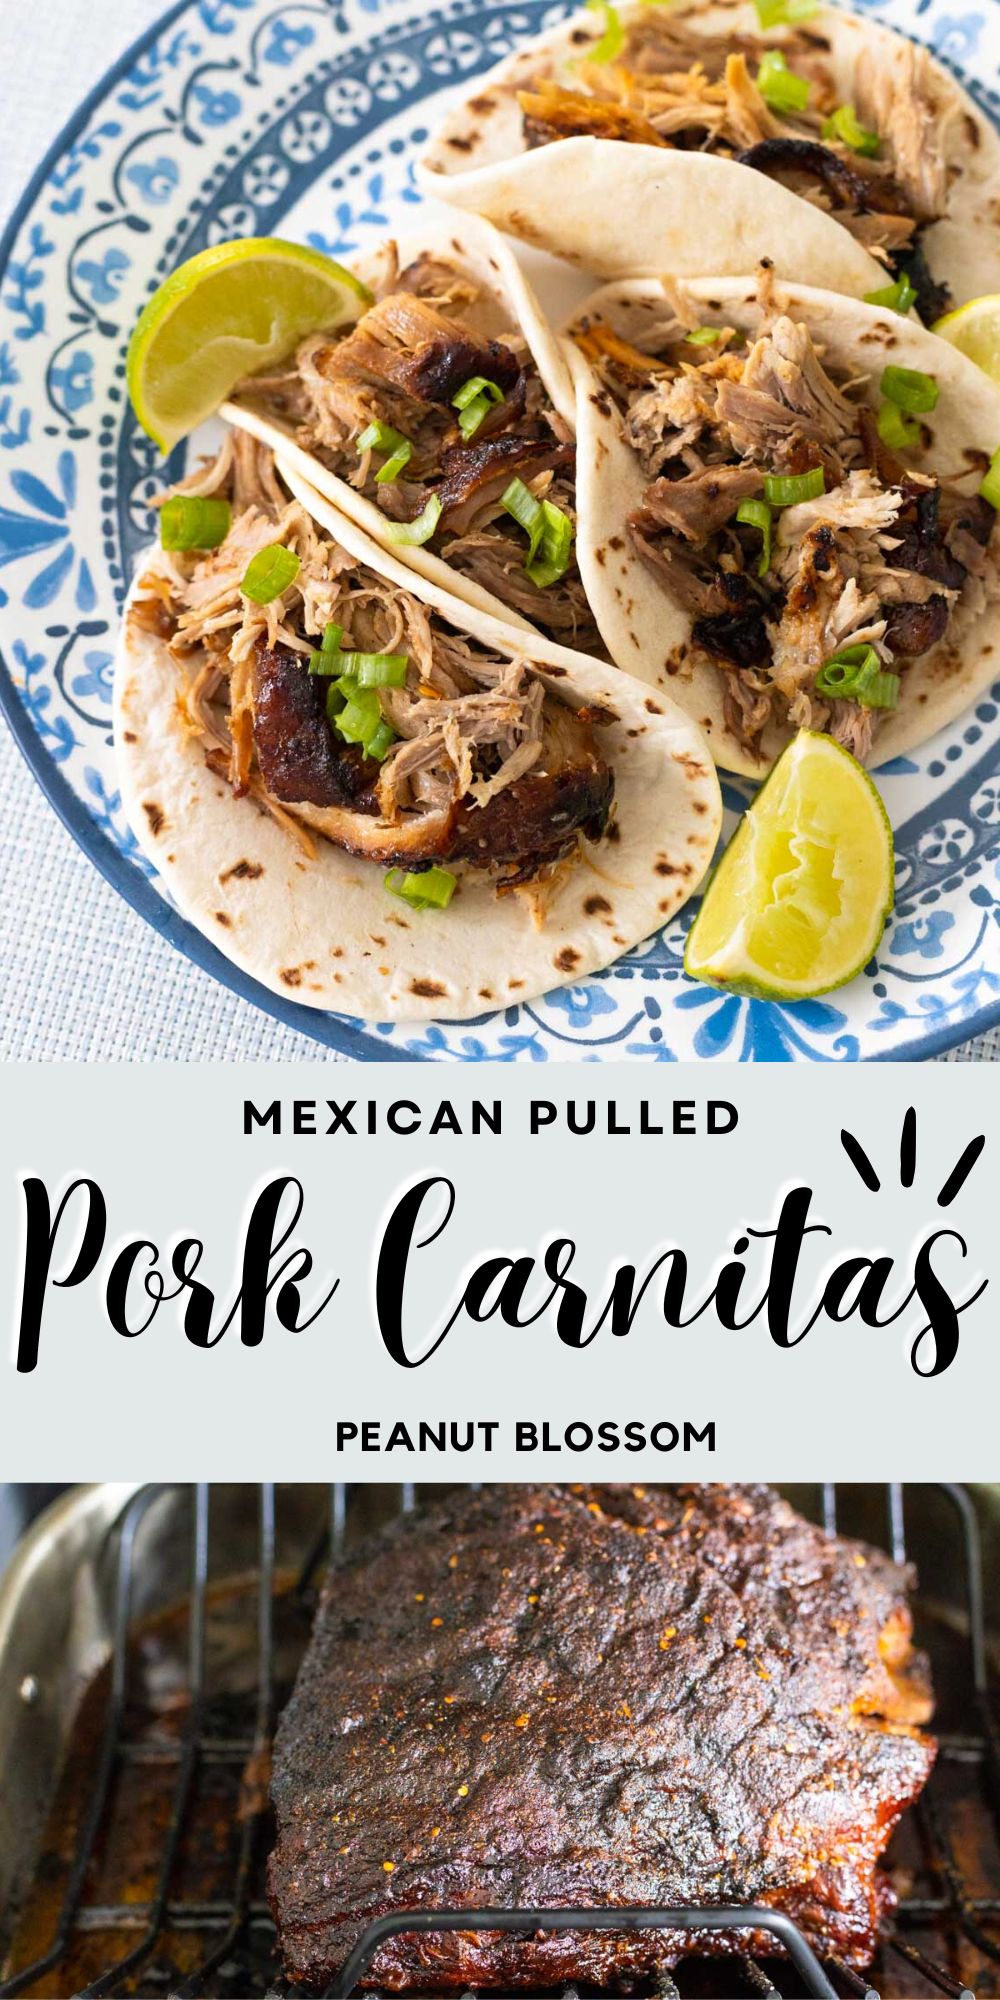 The photo collage shows a plate of carnitas tacos on top with lime wedges scattered around and a photo of the full pork roast in the pan on the bottom.